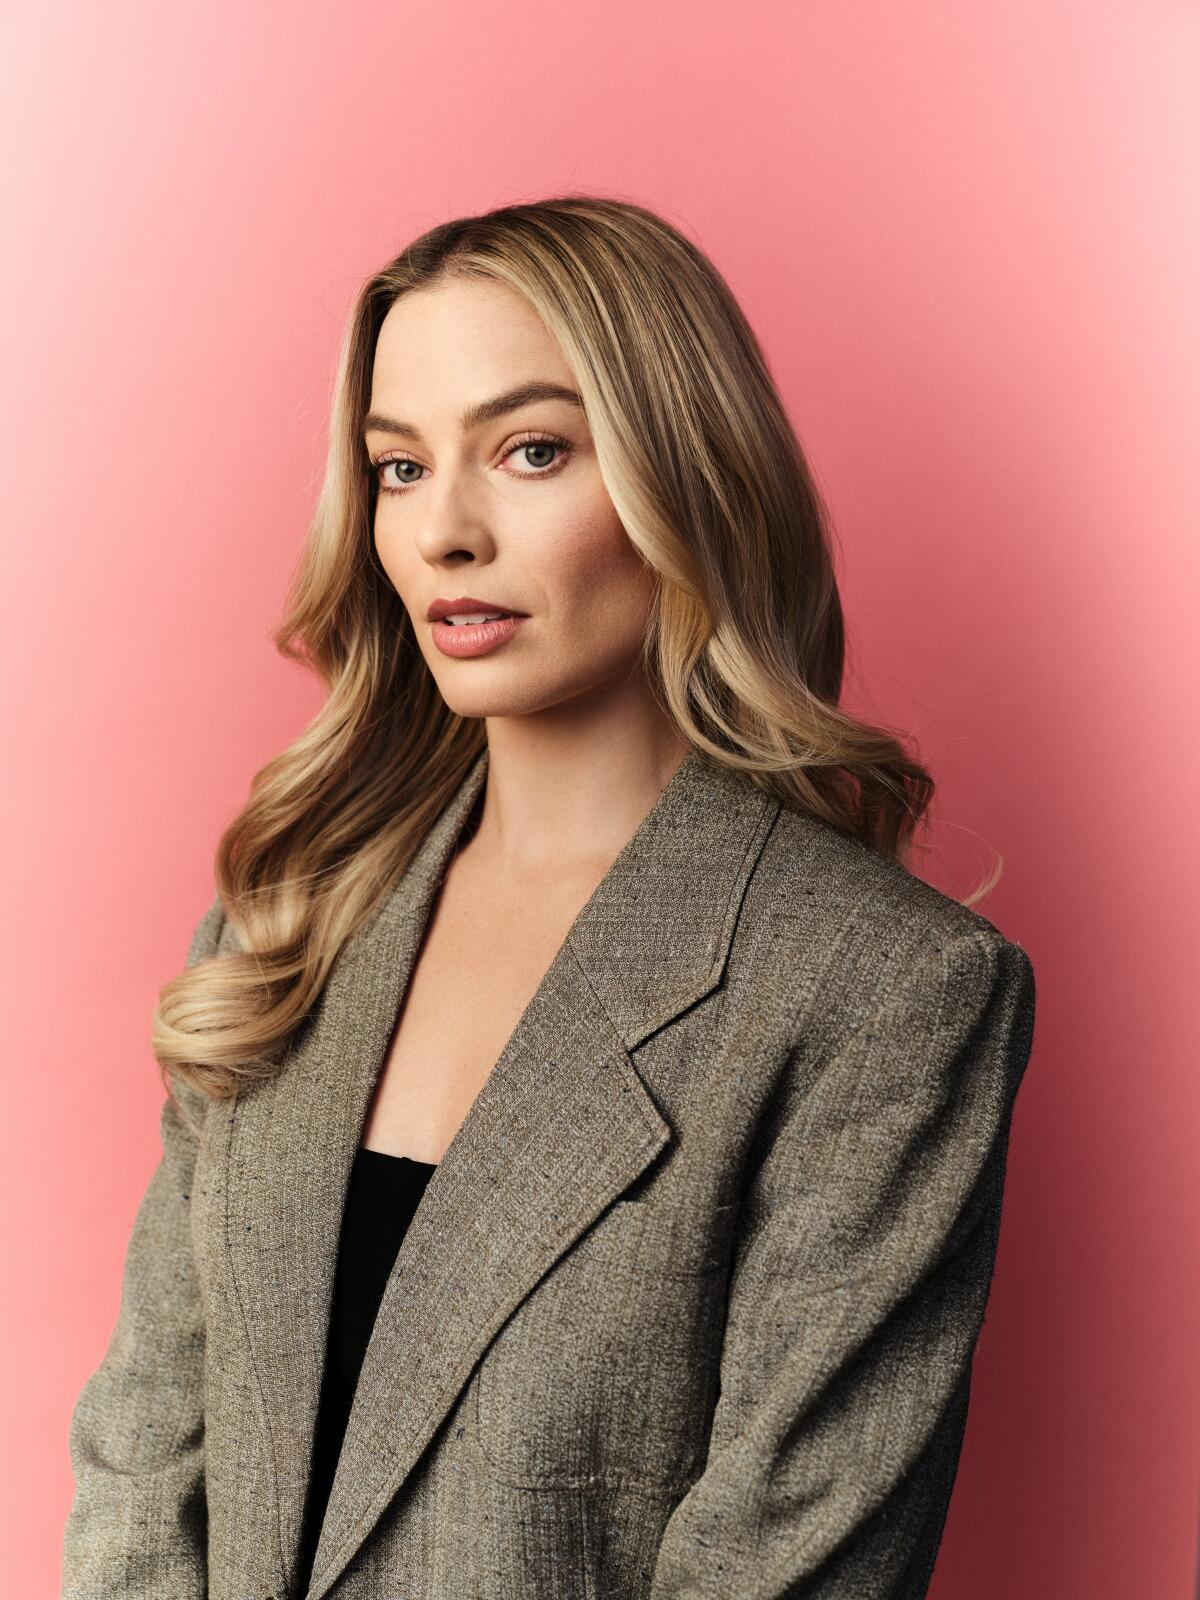 Margot Robbie in a gray oversized blazer and black top standing against a peachy, pink background